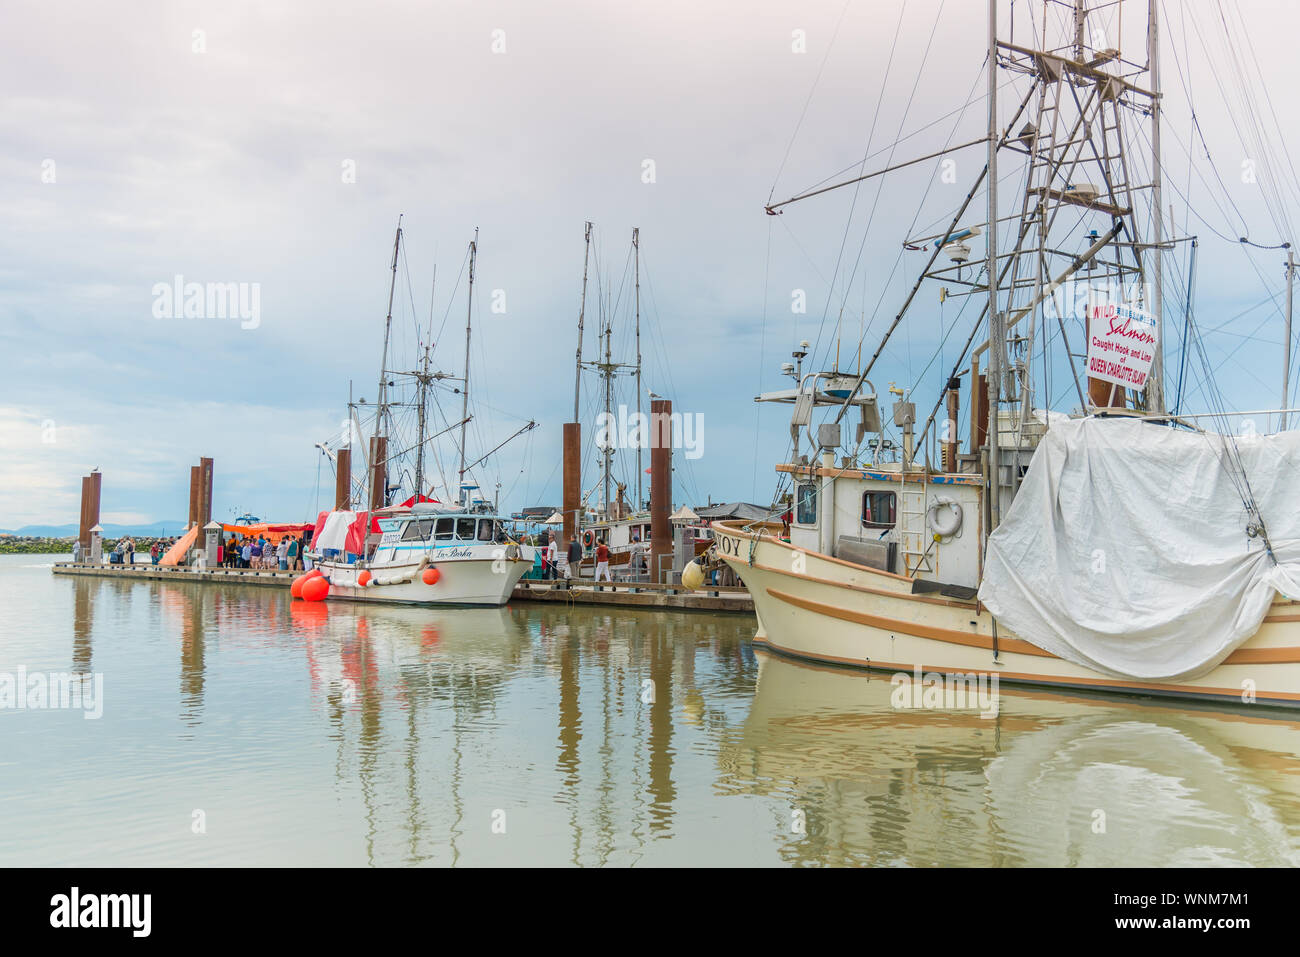 Steveston, British Columbia/Canada - June 24, 2018: fishing boats docked at Fisherman's Wharf, selling freshly caught seafood to tourists and locals. Stock Photo